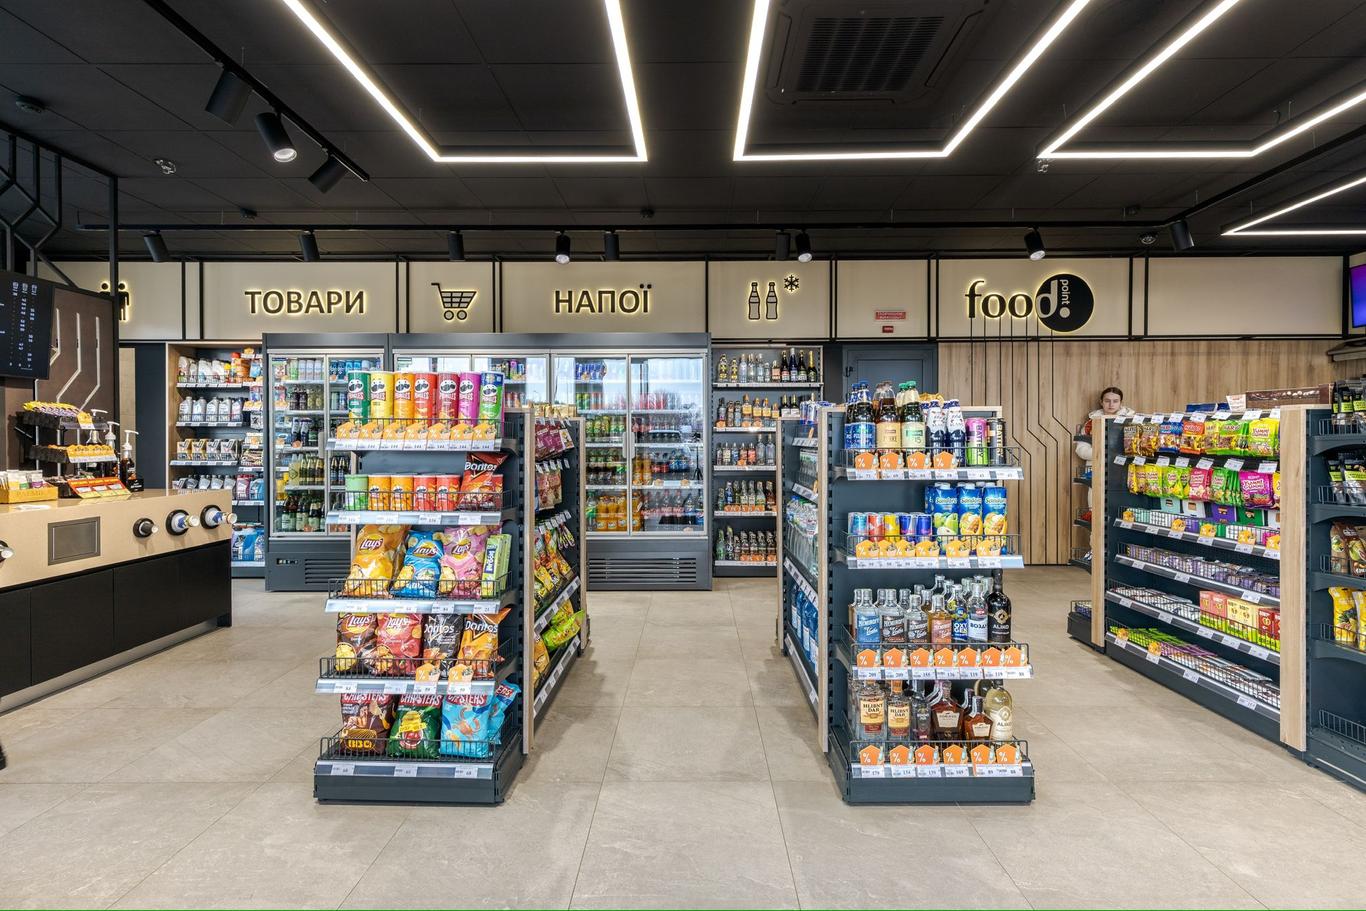 Austrian gas station chain AMIC ENERGY reveals a brand-new style